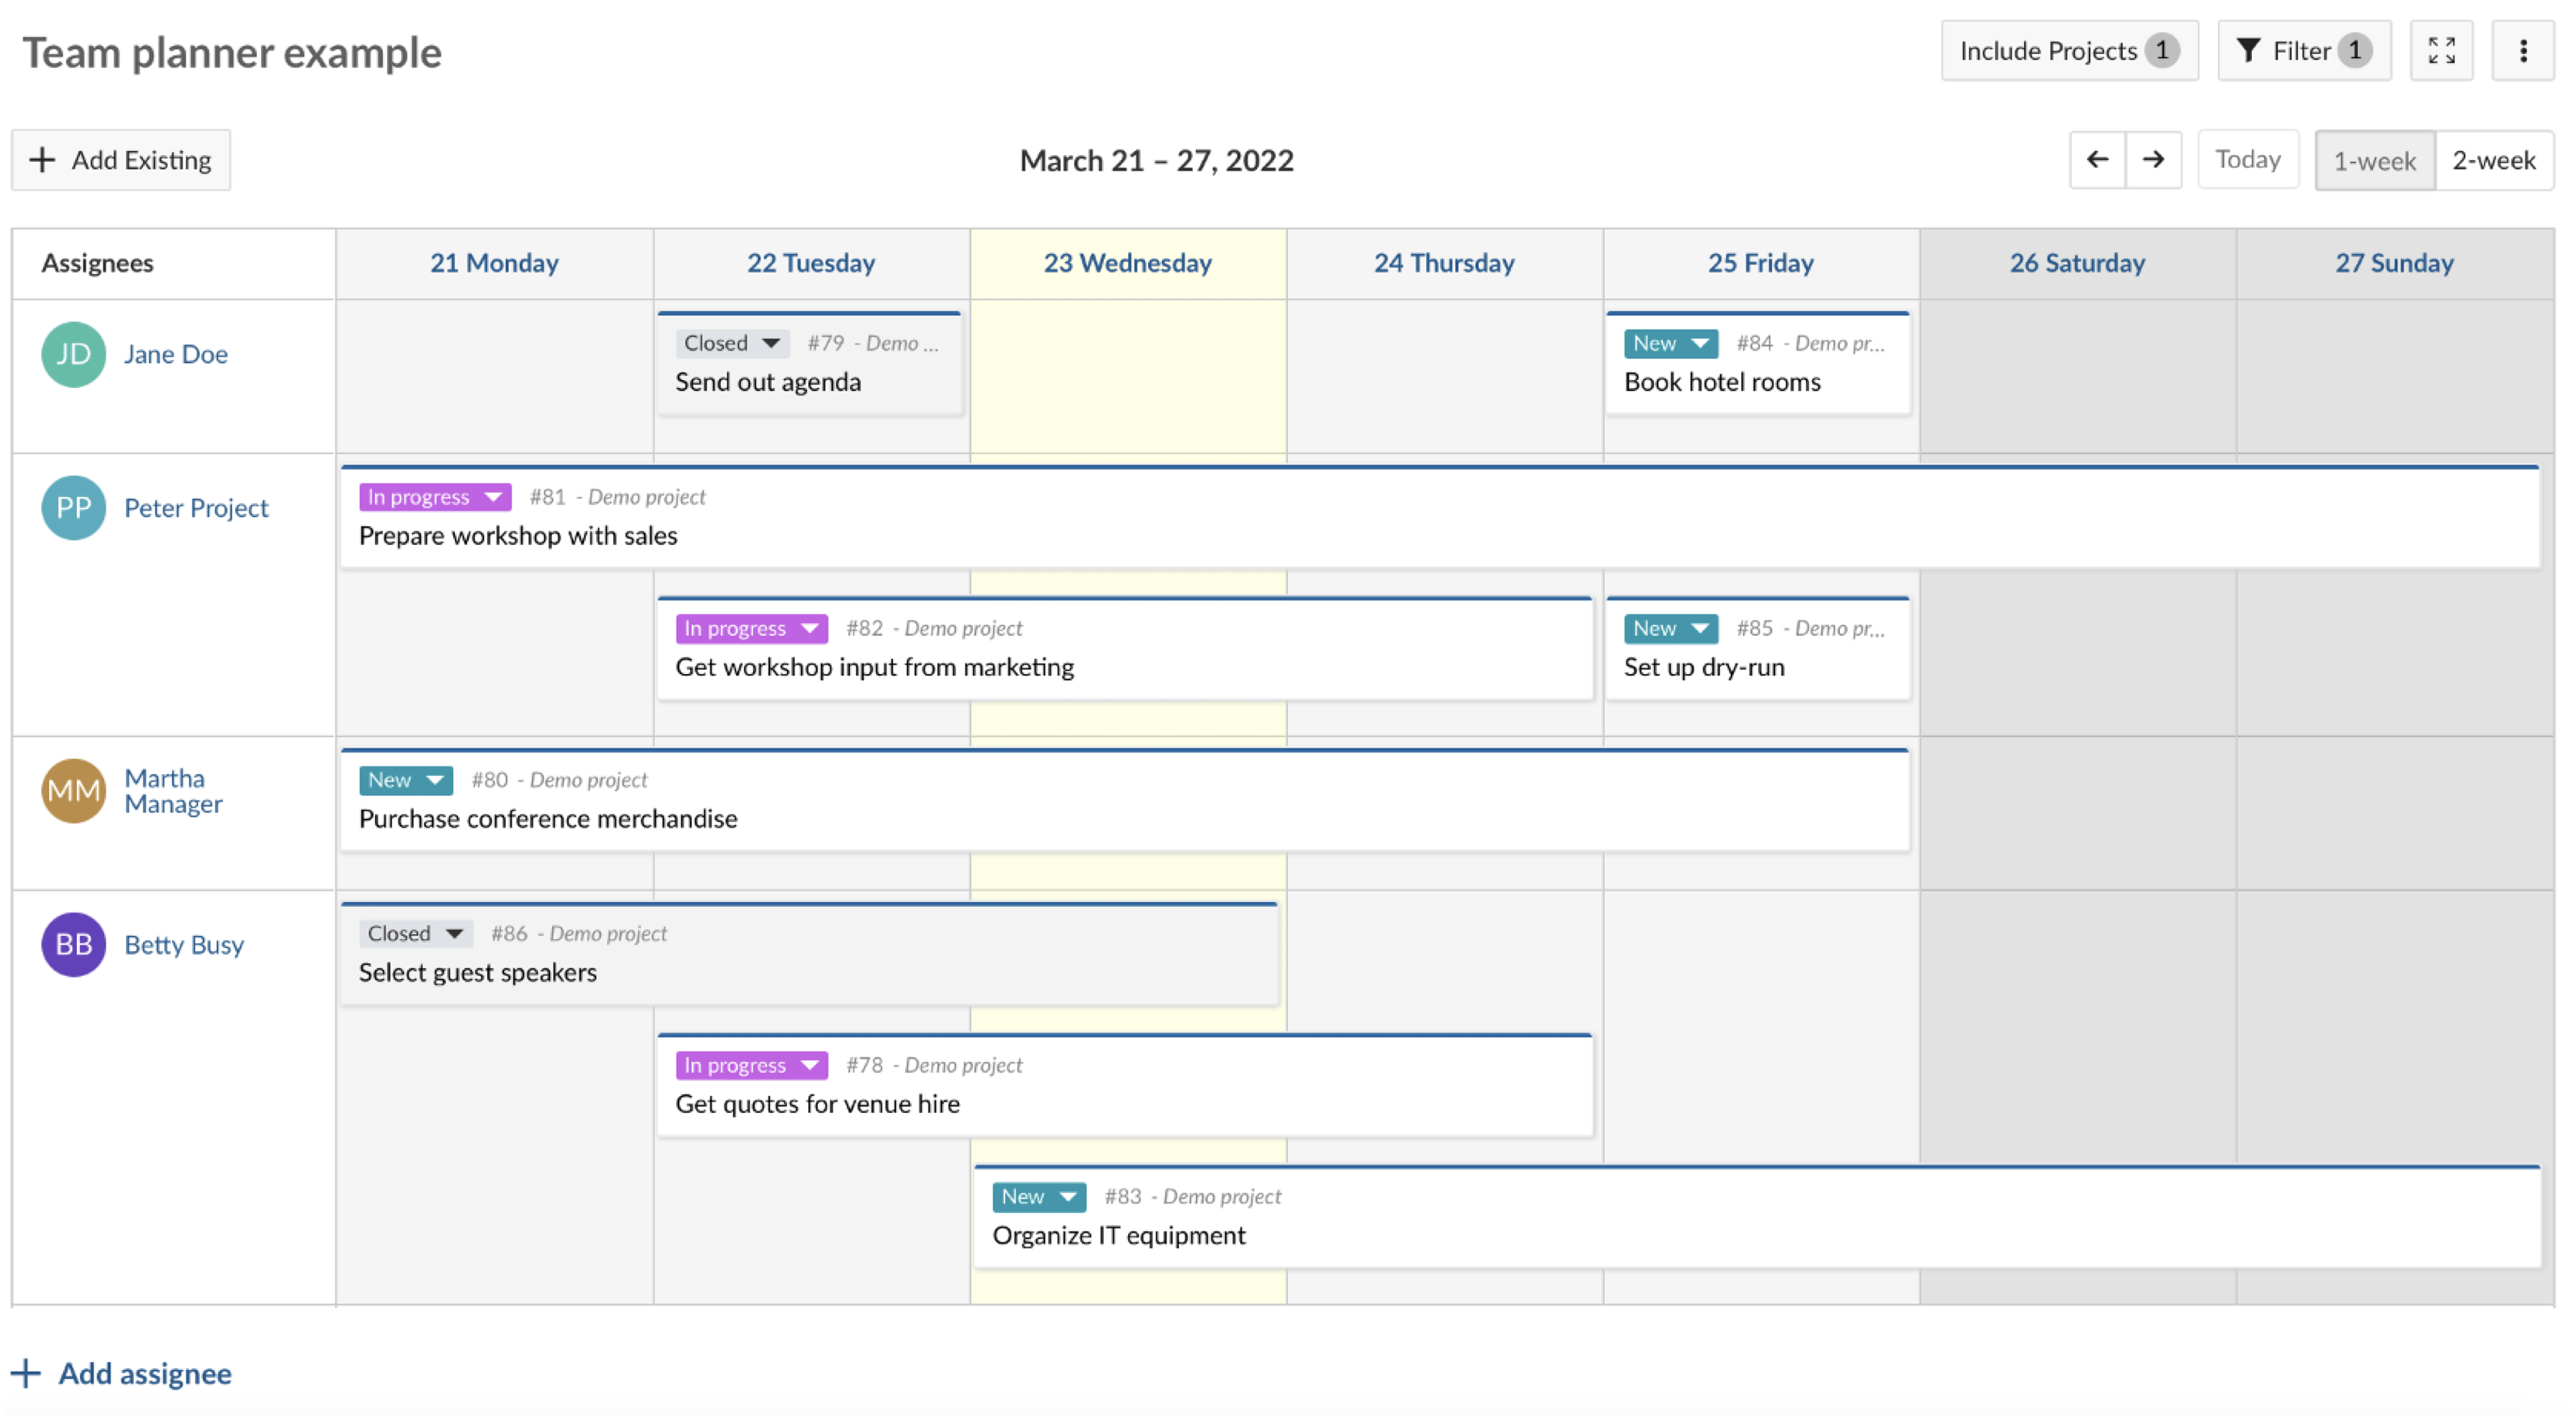 team planner with assignees and work packages by day of one week